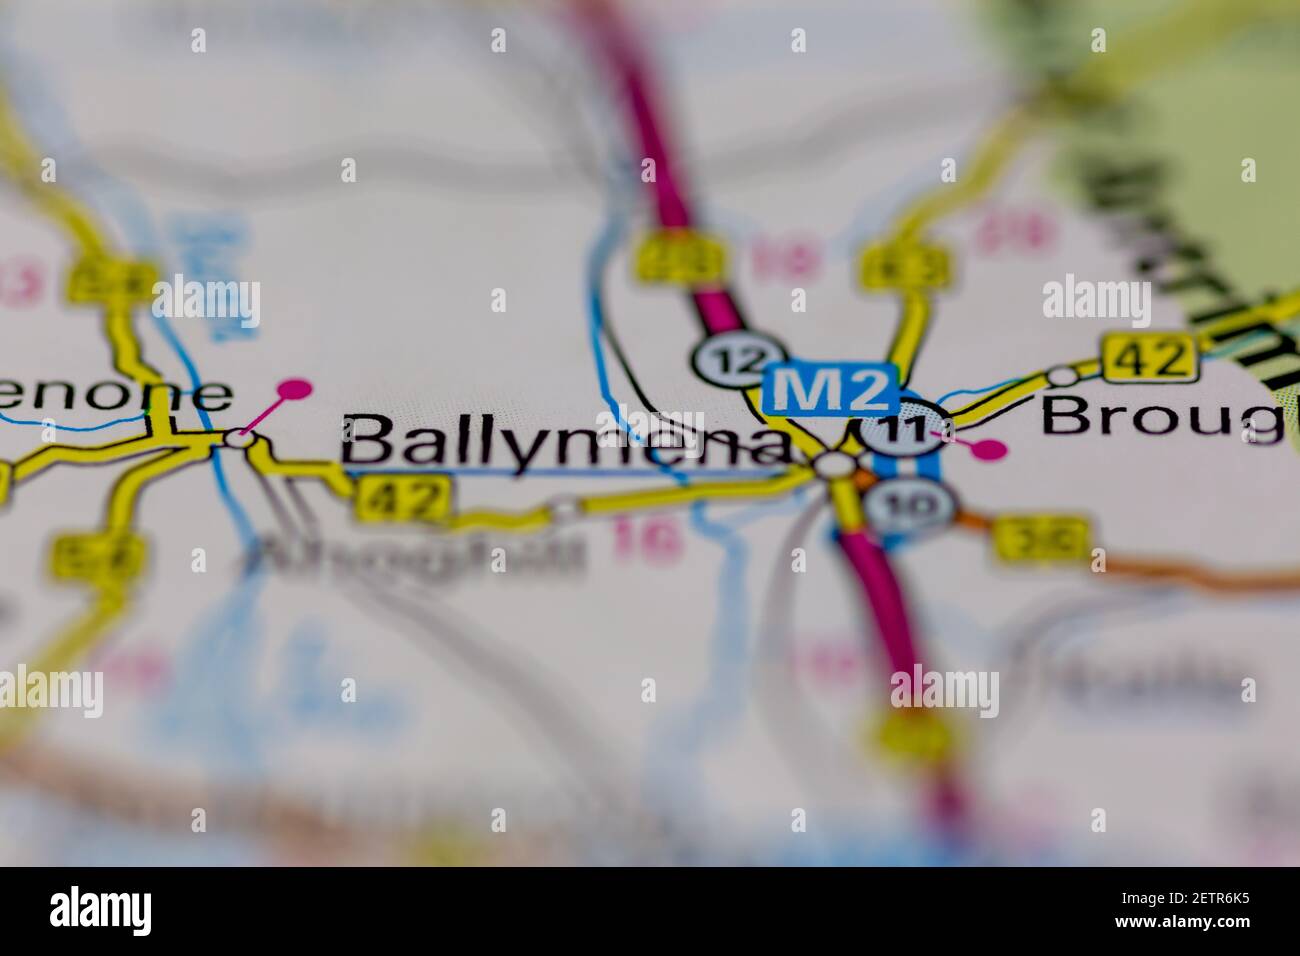 Ballymena Shown on a road map or Geography map and atlas Stock Photo